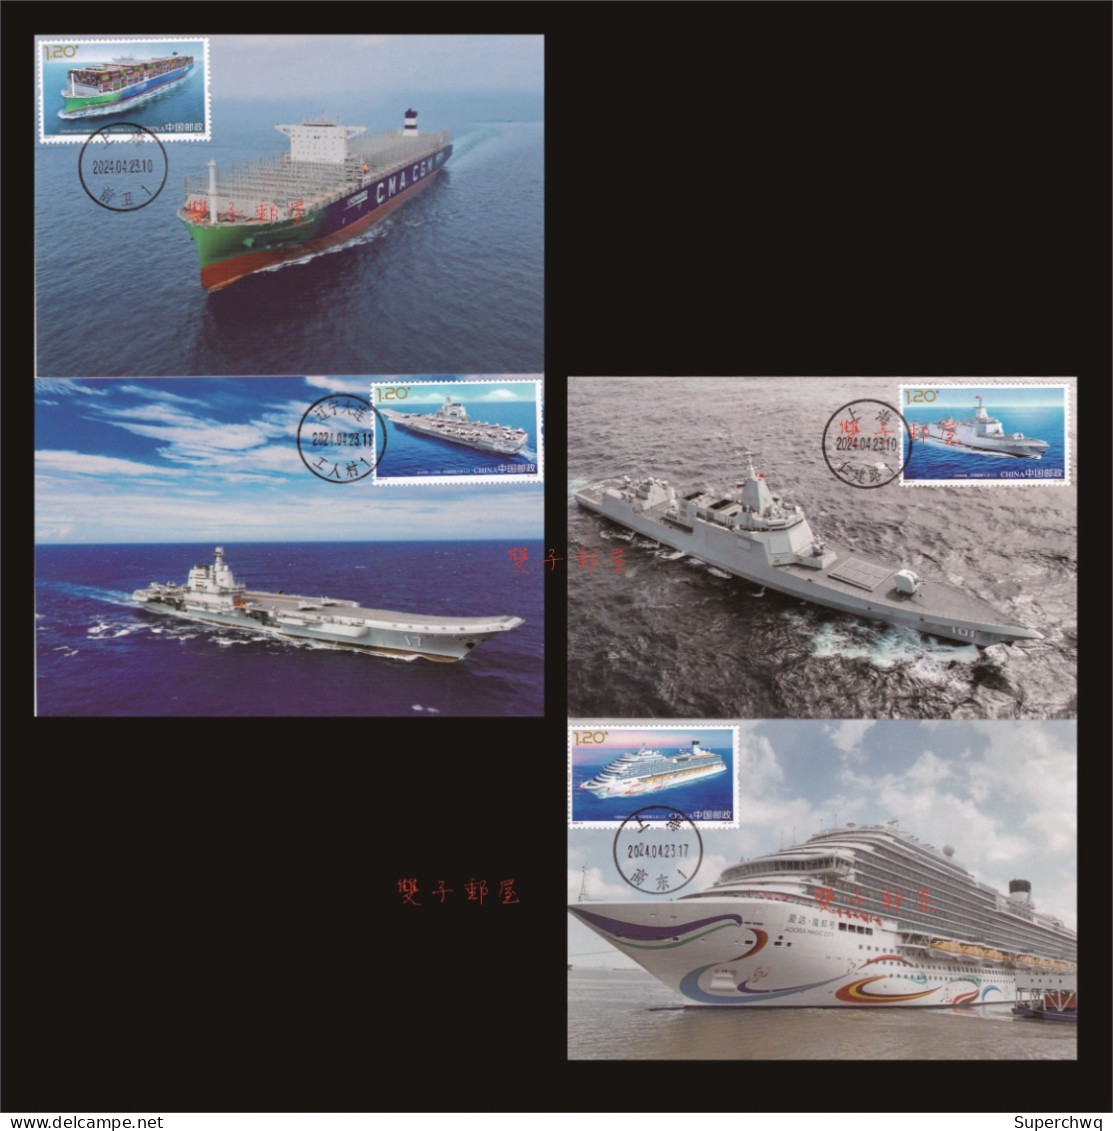 China Maximum Card 2024-5 China Shipbuilding Industry Second Group, Destroyer Aircraft Carrier，4 Pcs - Cartes-maximum